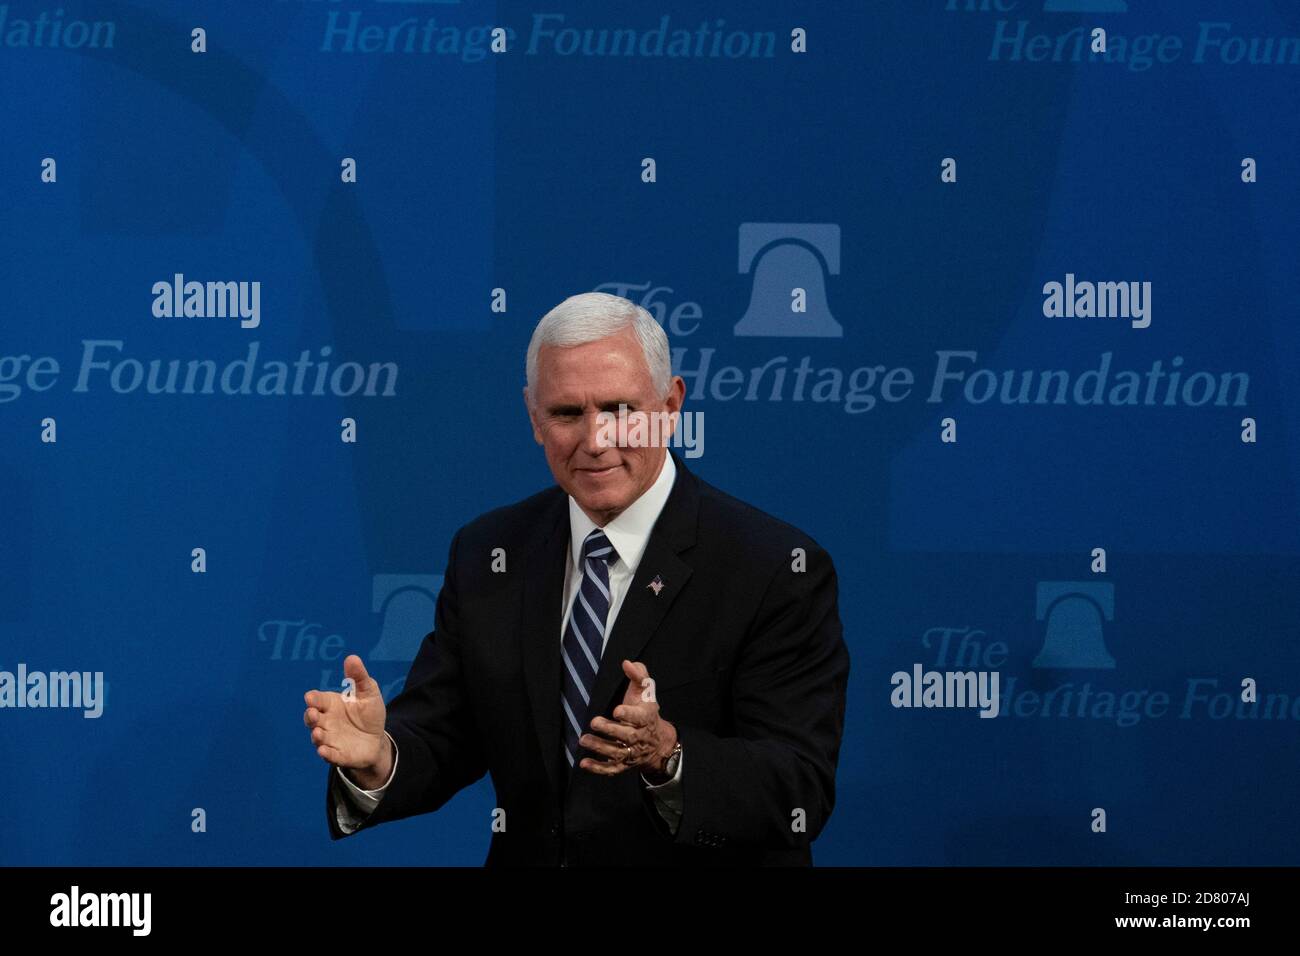 US Vice President Mike Pence speaks at the Heritage Foundation on Tuesday, September 17, 2019 in Washington, D.C. Pence spoke about the importance of the USMCA trade agreement and its impact on American prosperity. Credit: Alex Edelman/The Photo Access Stock Photo